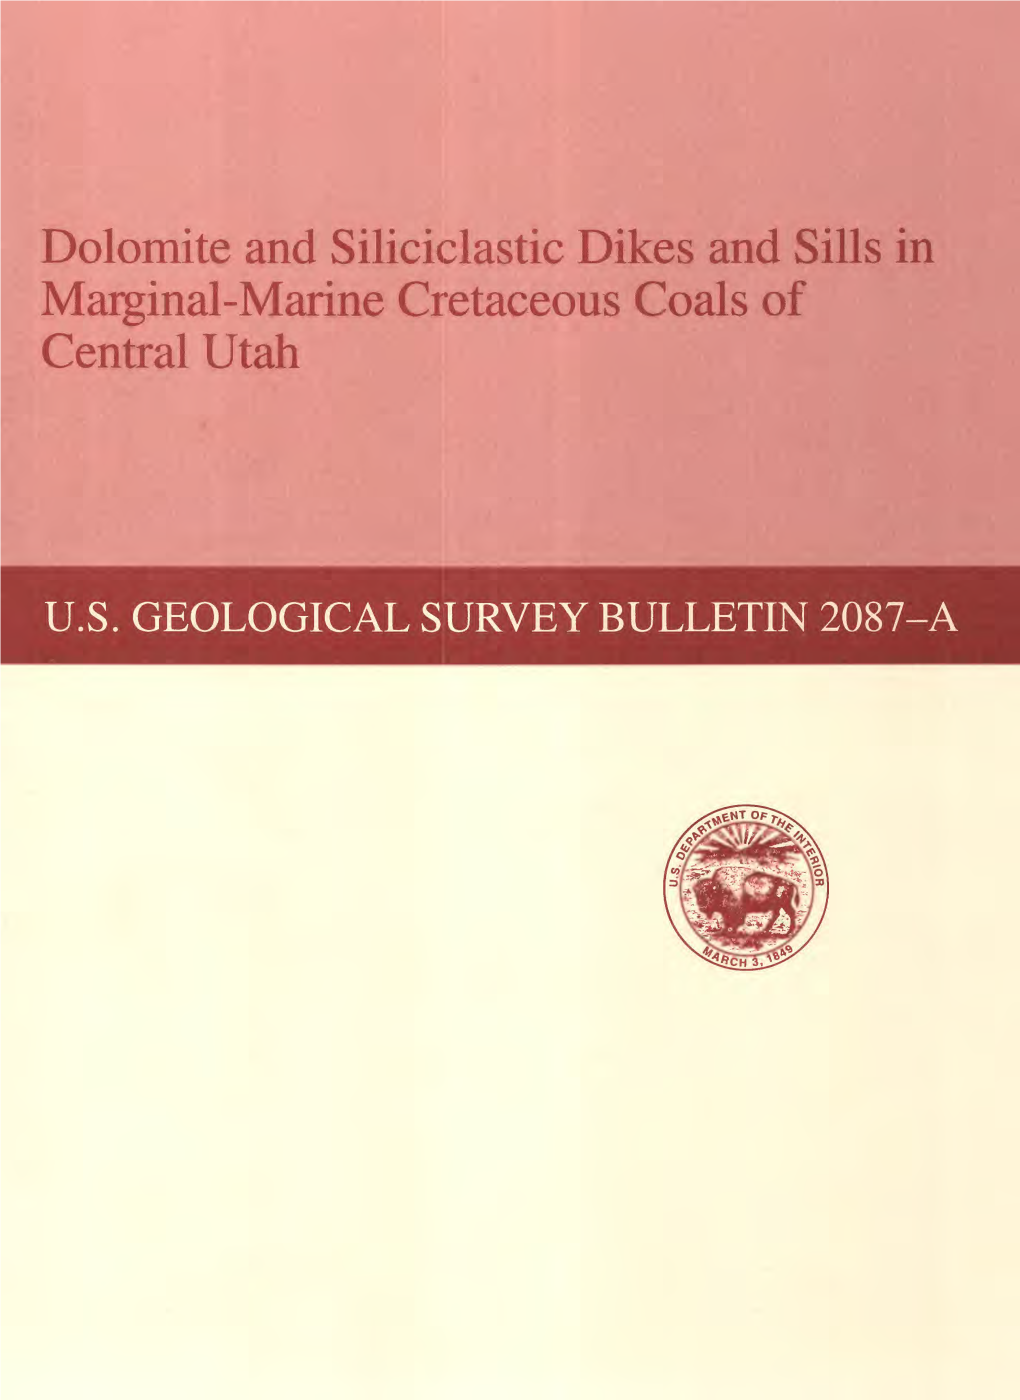 Dolomite and Siliciclastic Dikes and Sills in Marginal-Marine Cretaceous Coals of Central Utah